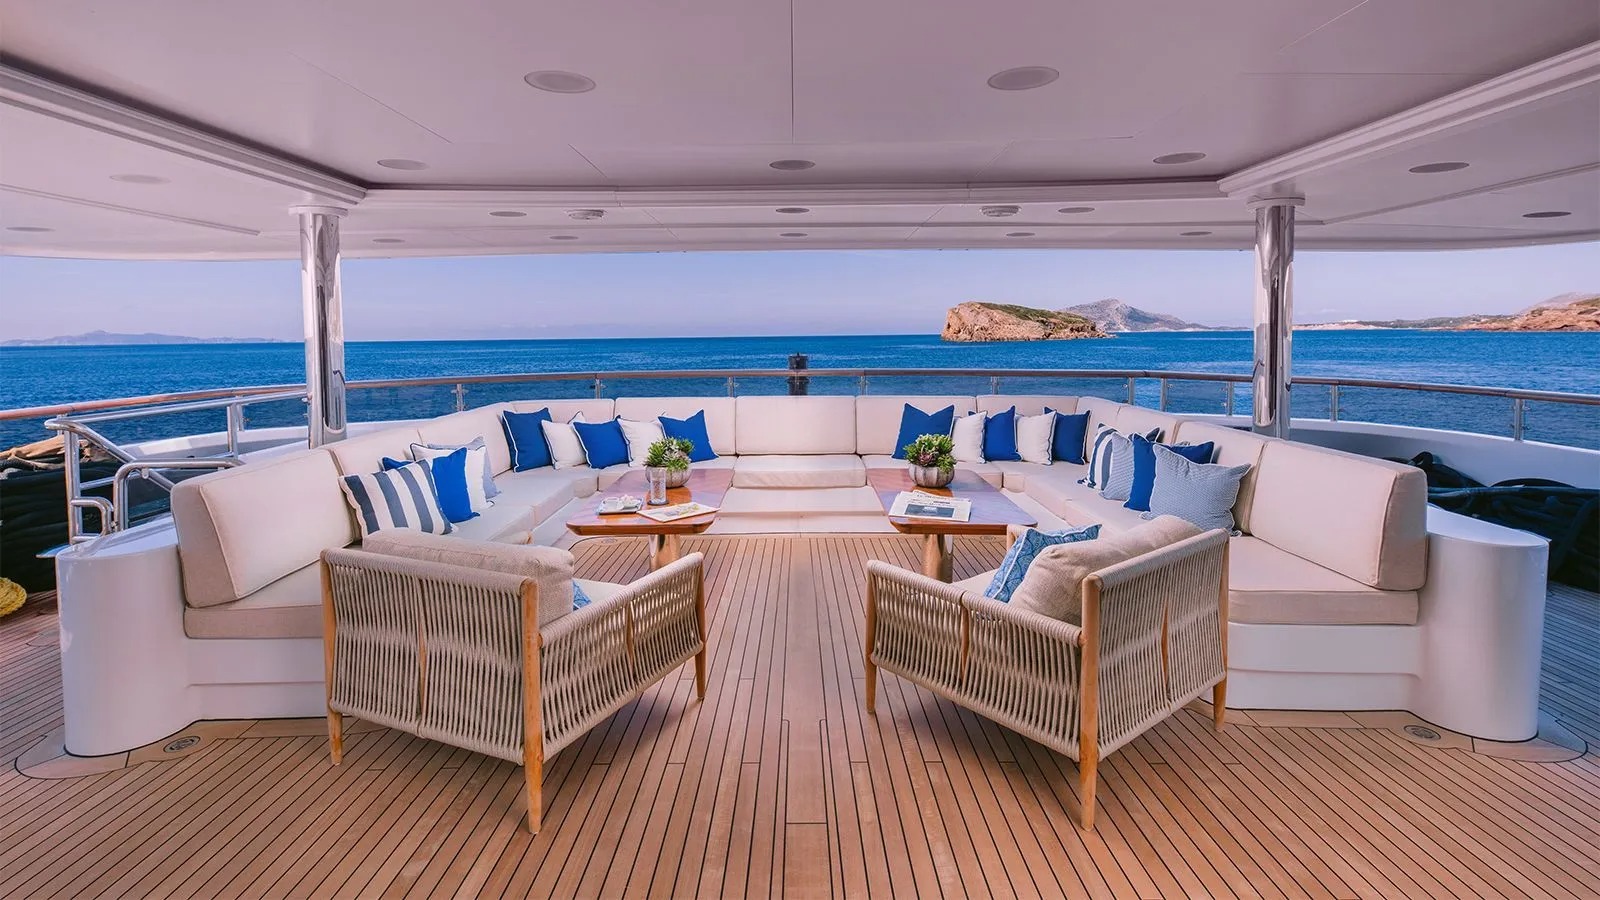 Aft Deck Seating On The Exterior